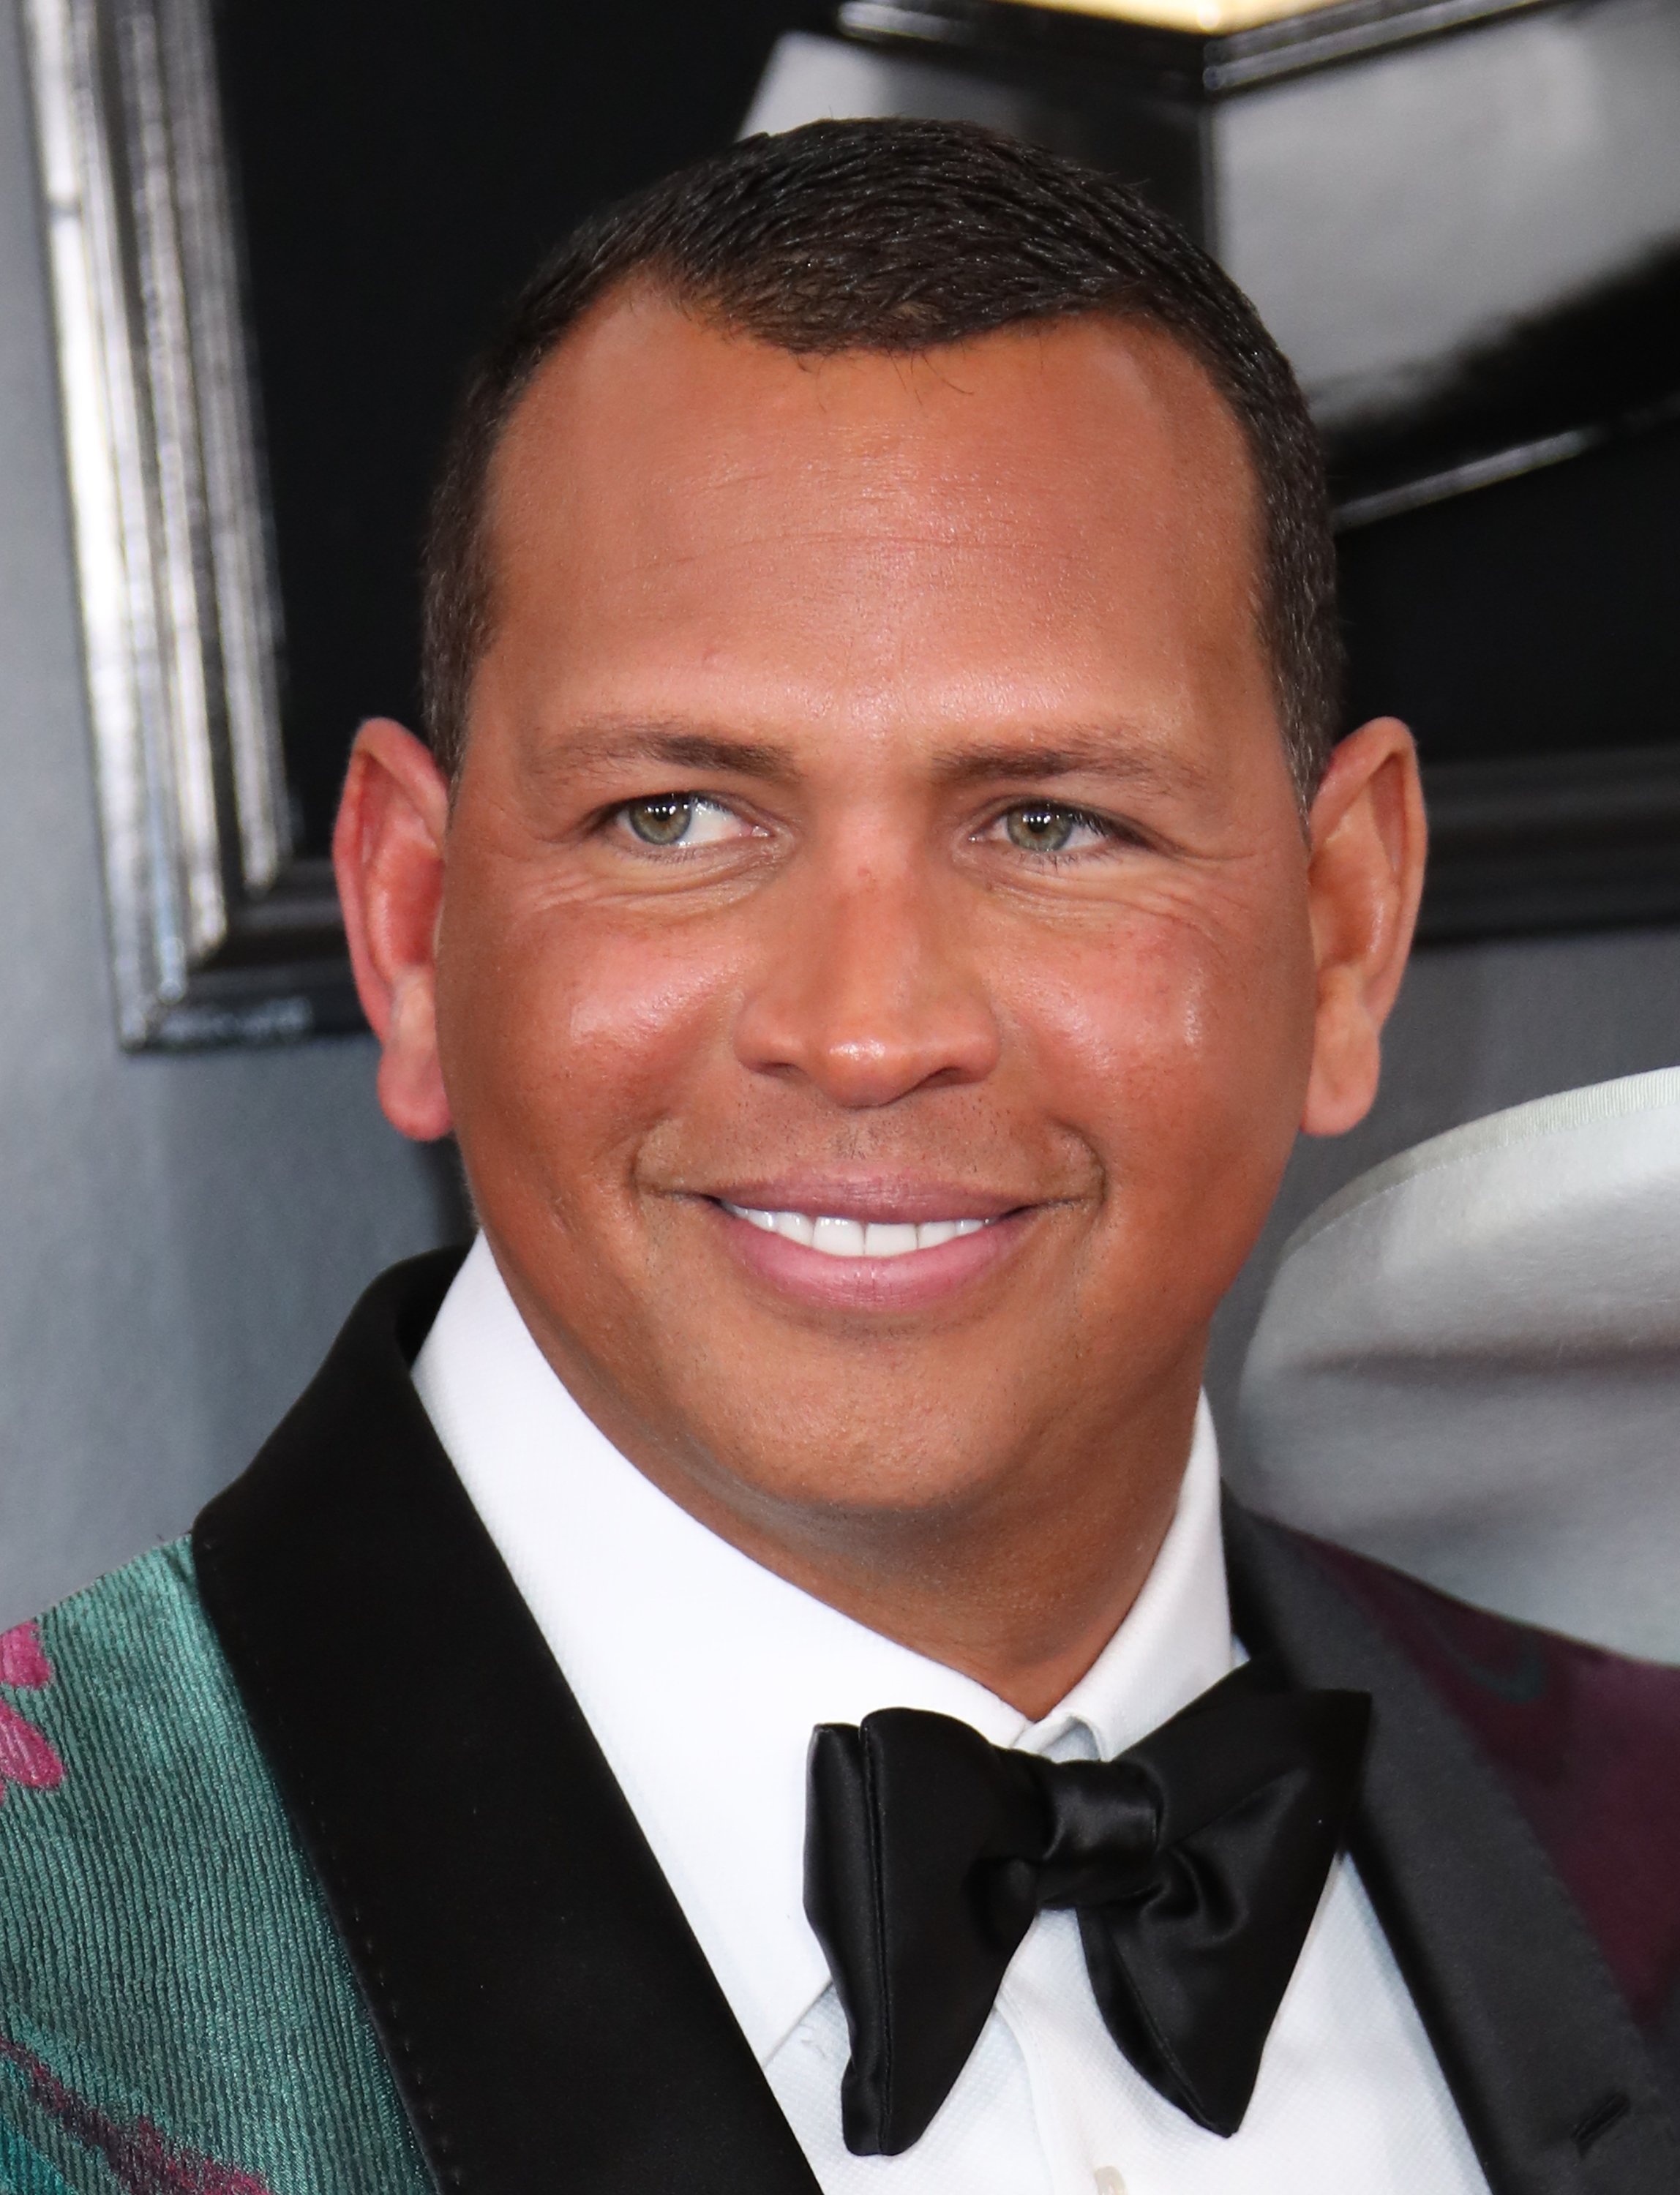 Alex Rodriguez at the 61st Annual GRAMMY Awards at Staples Center on February 10, 2019 in Los Angeles, California | Photo: Getty Images